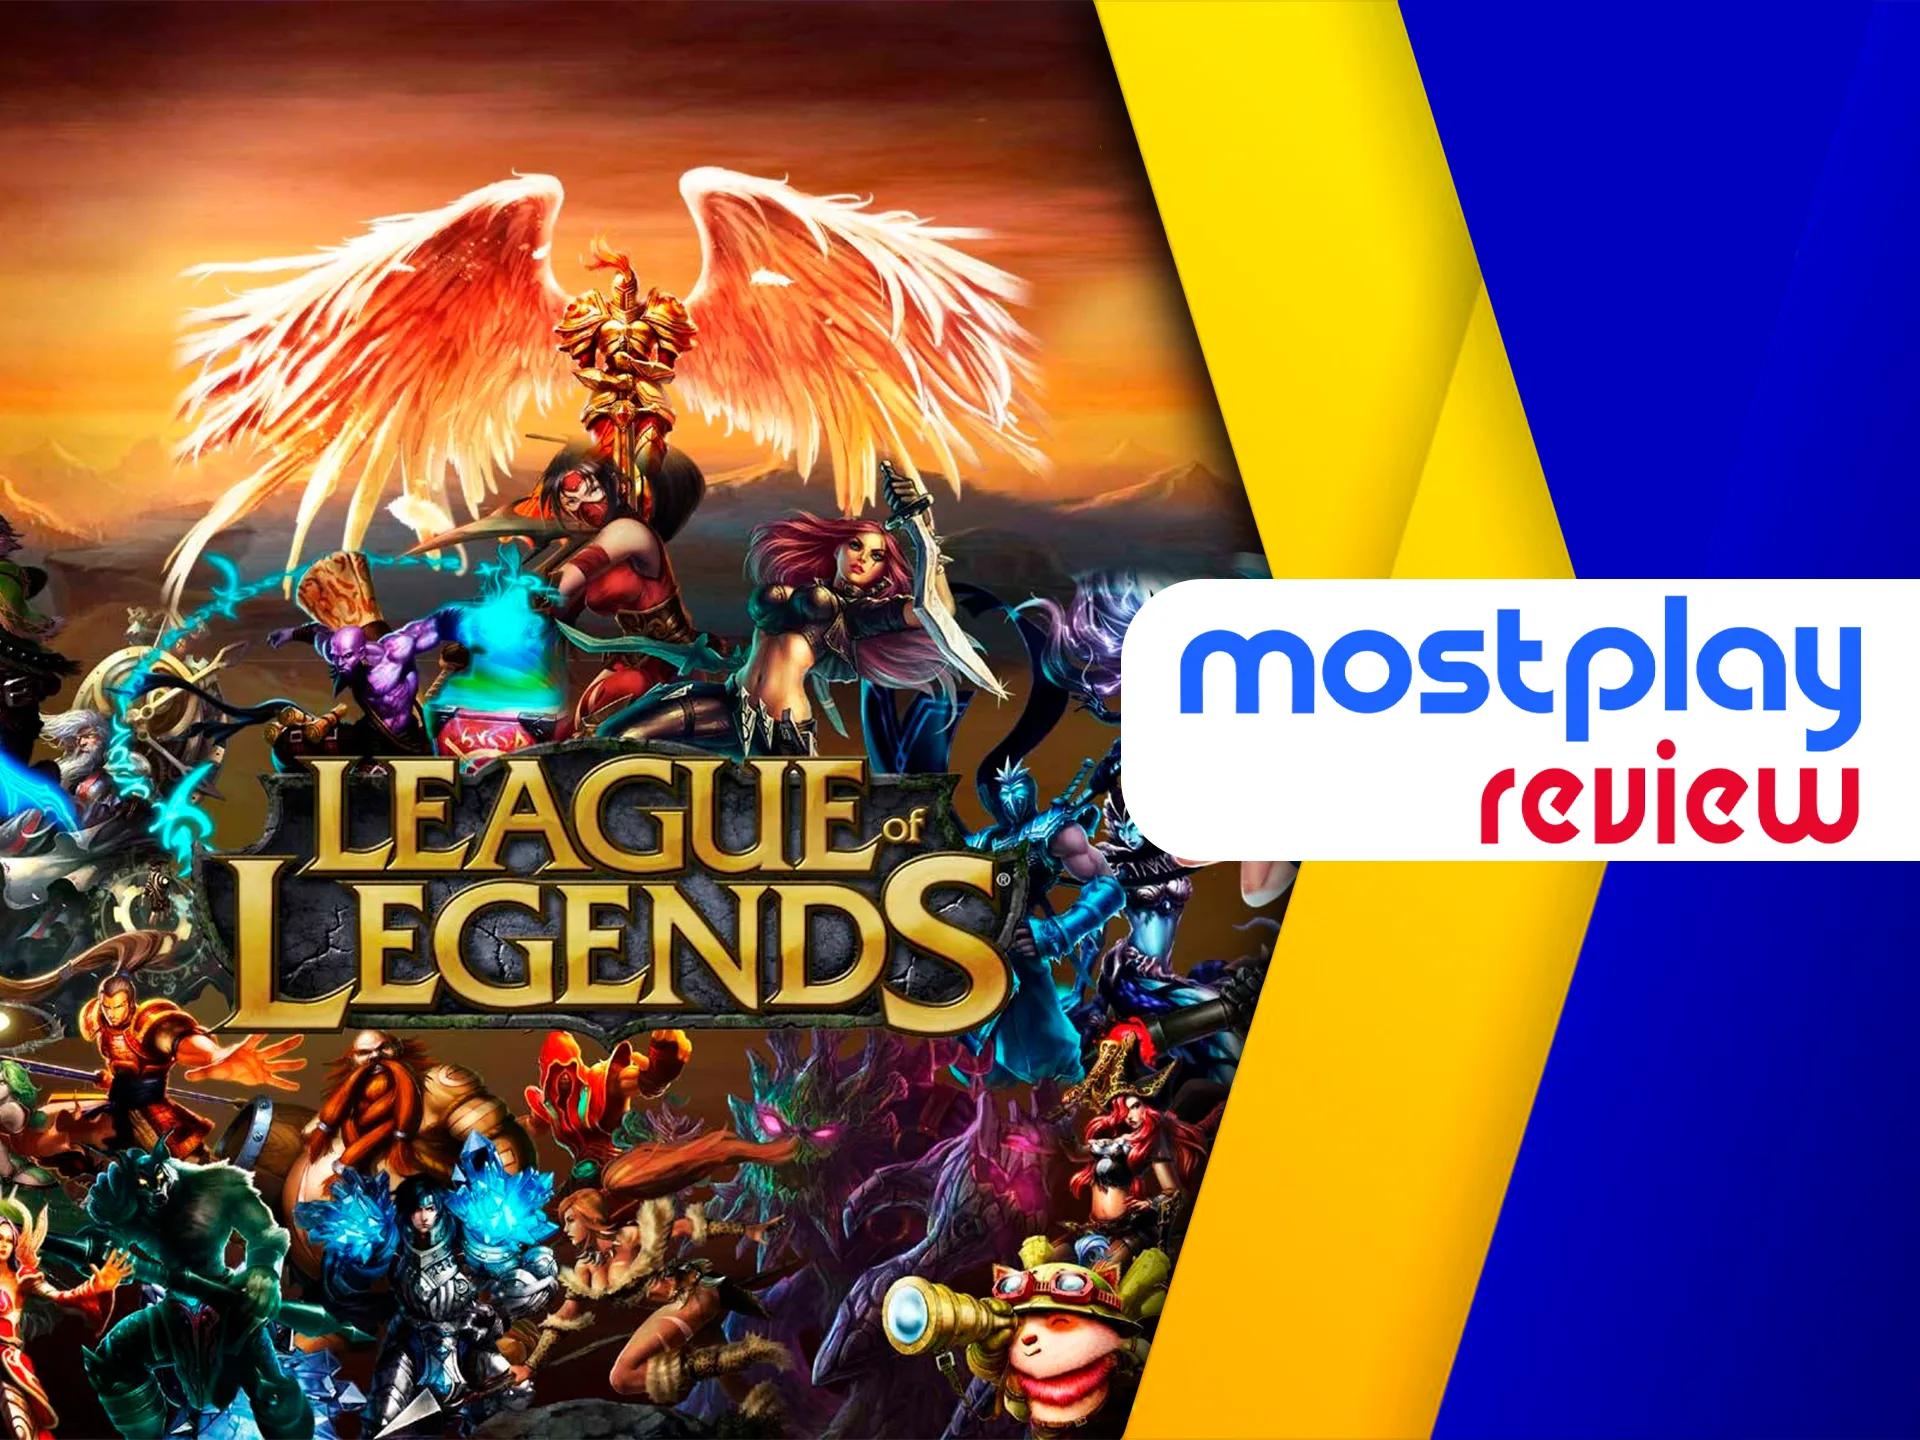 Bet on the best League of Legends teams and win a huge amount of money.